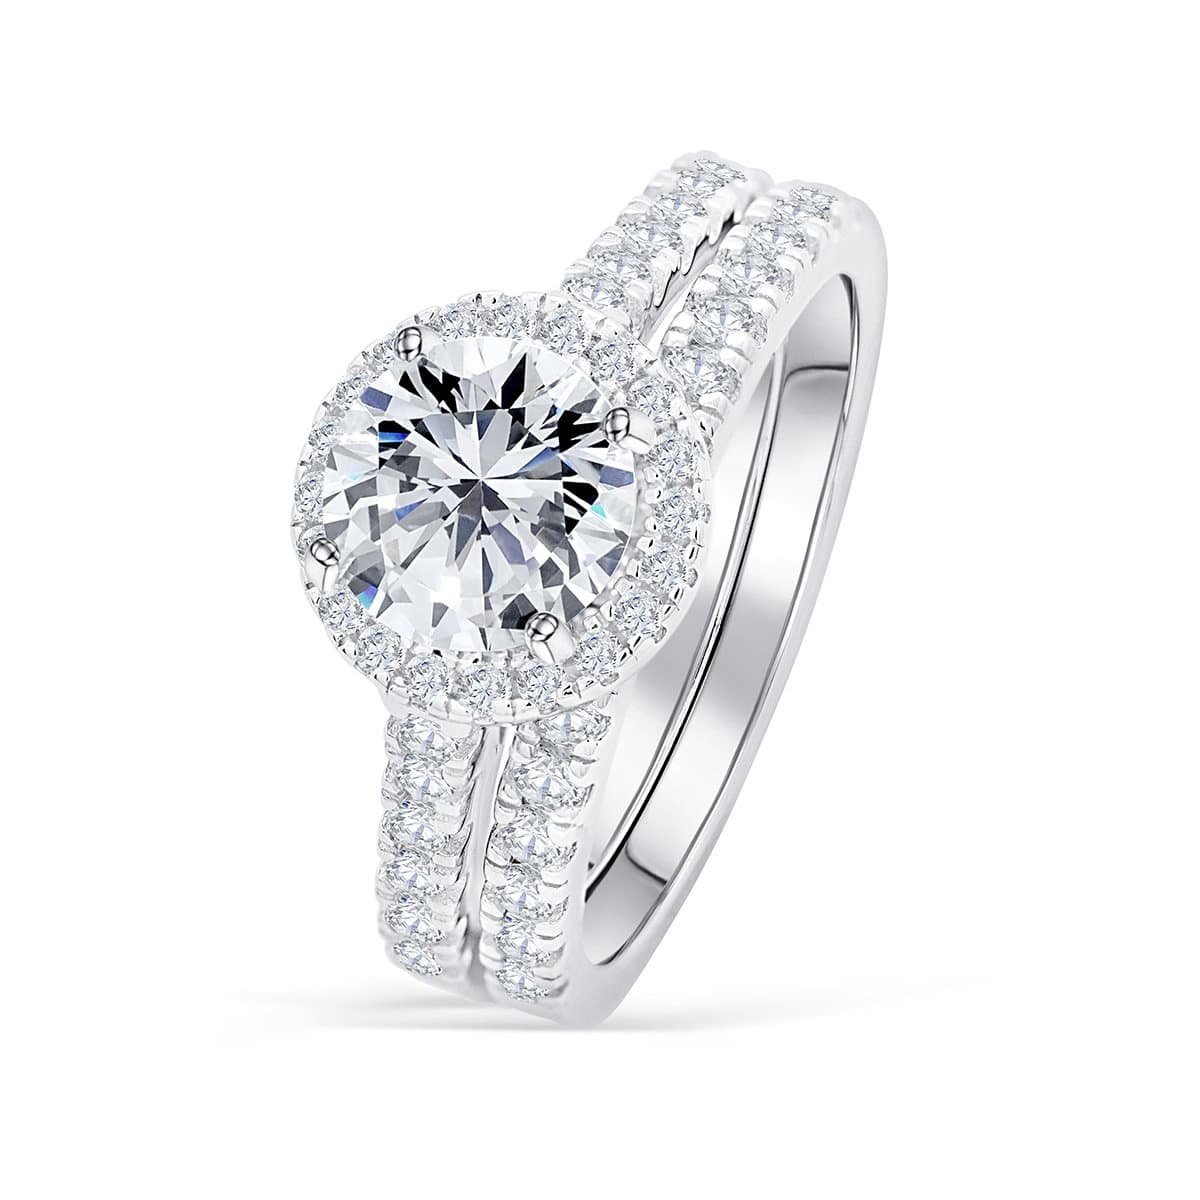 Do I Need a Ring Guard for My Engagement Ring? – Modern Gents